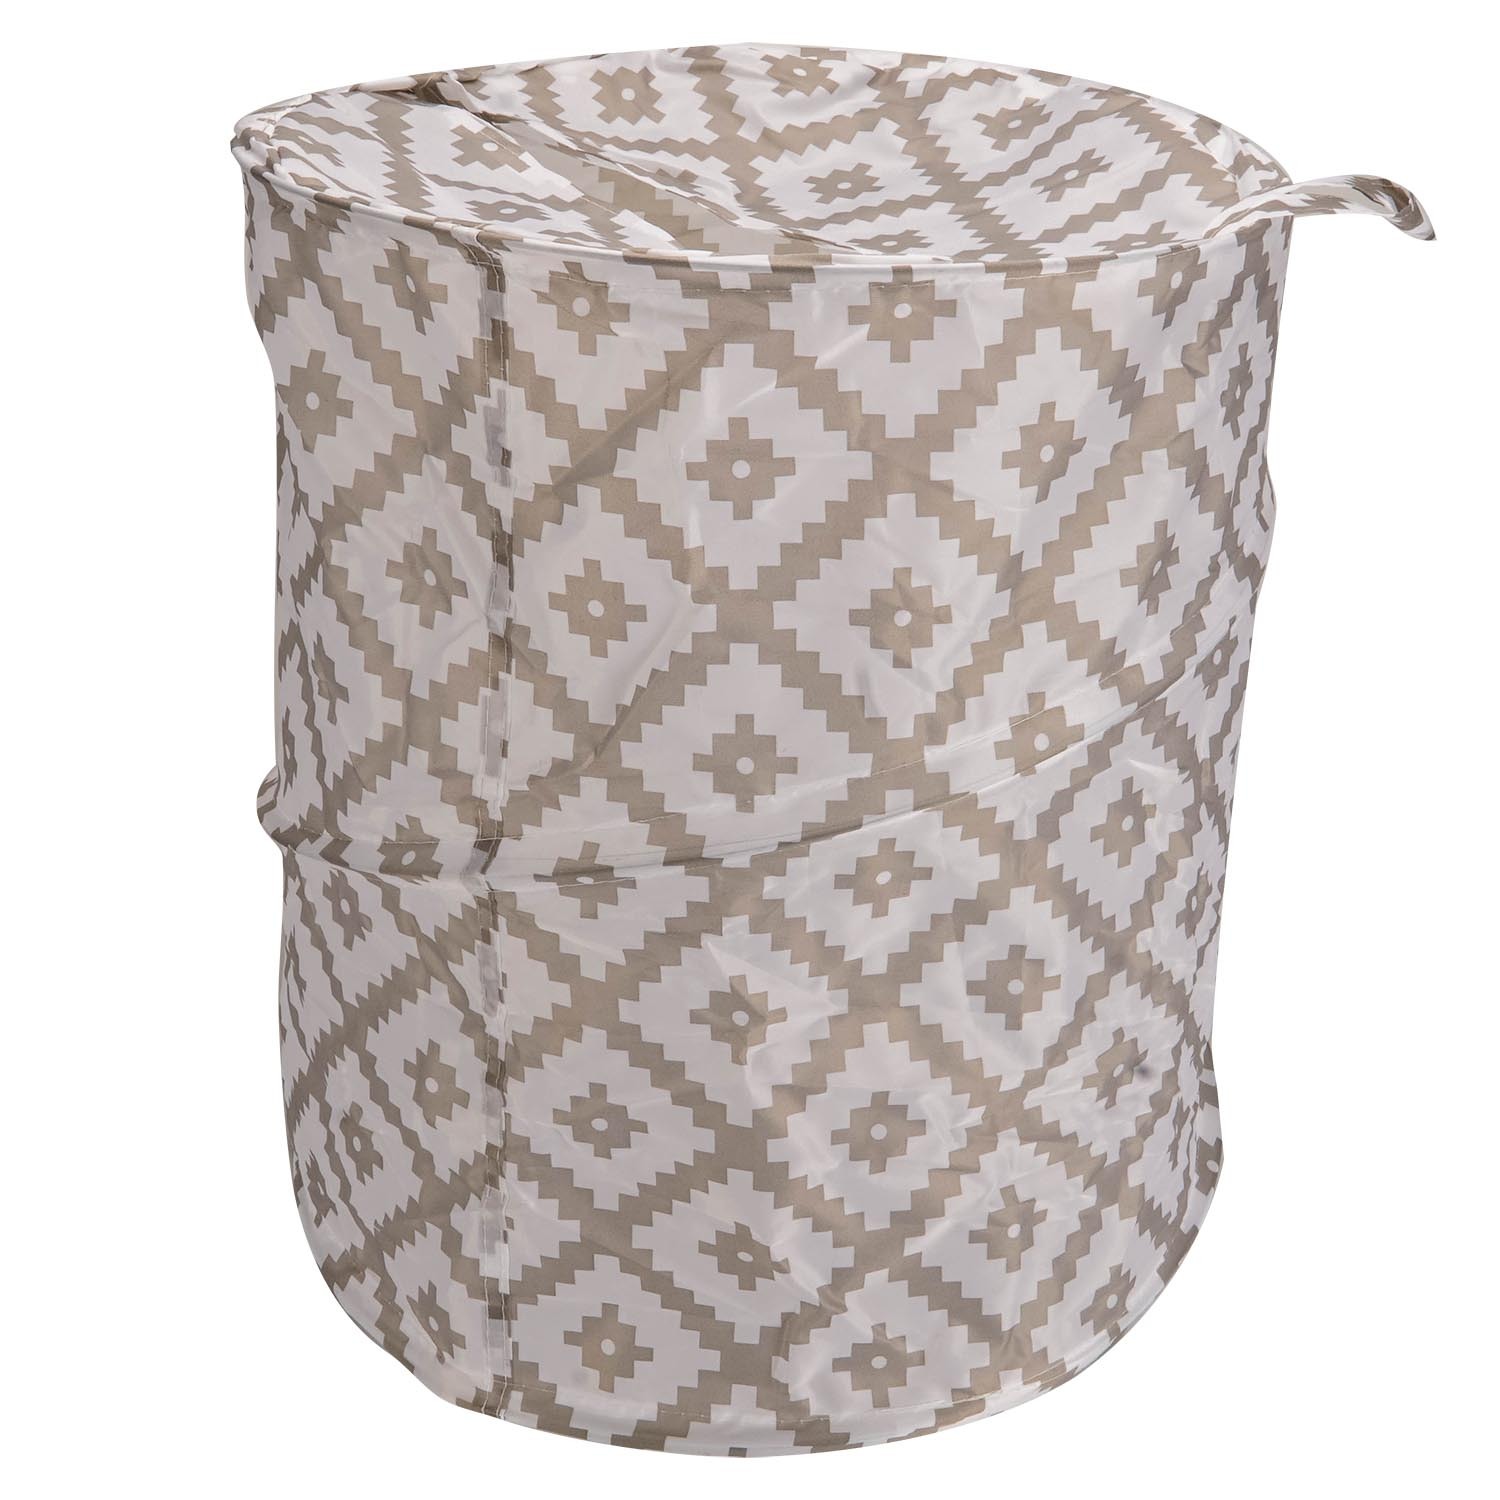 Single Grey Geometric Pop Up Laundry Hamper in Assorted styles Image 2